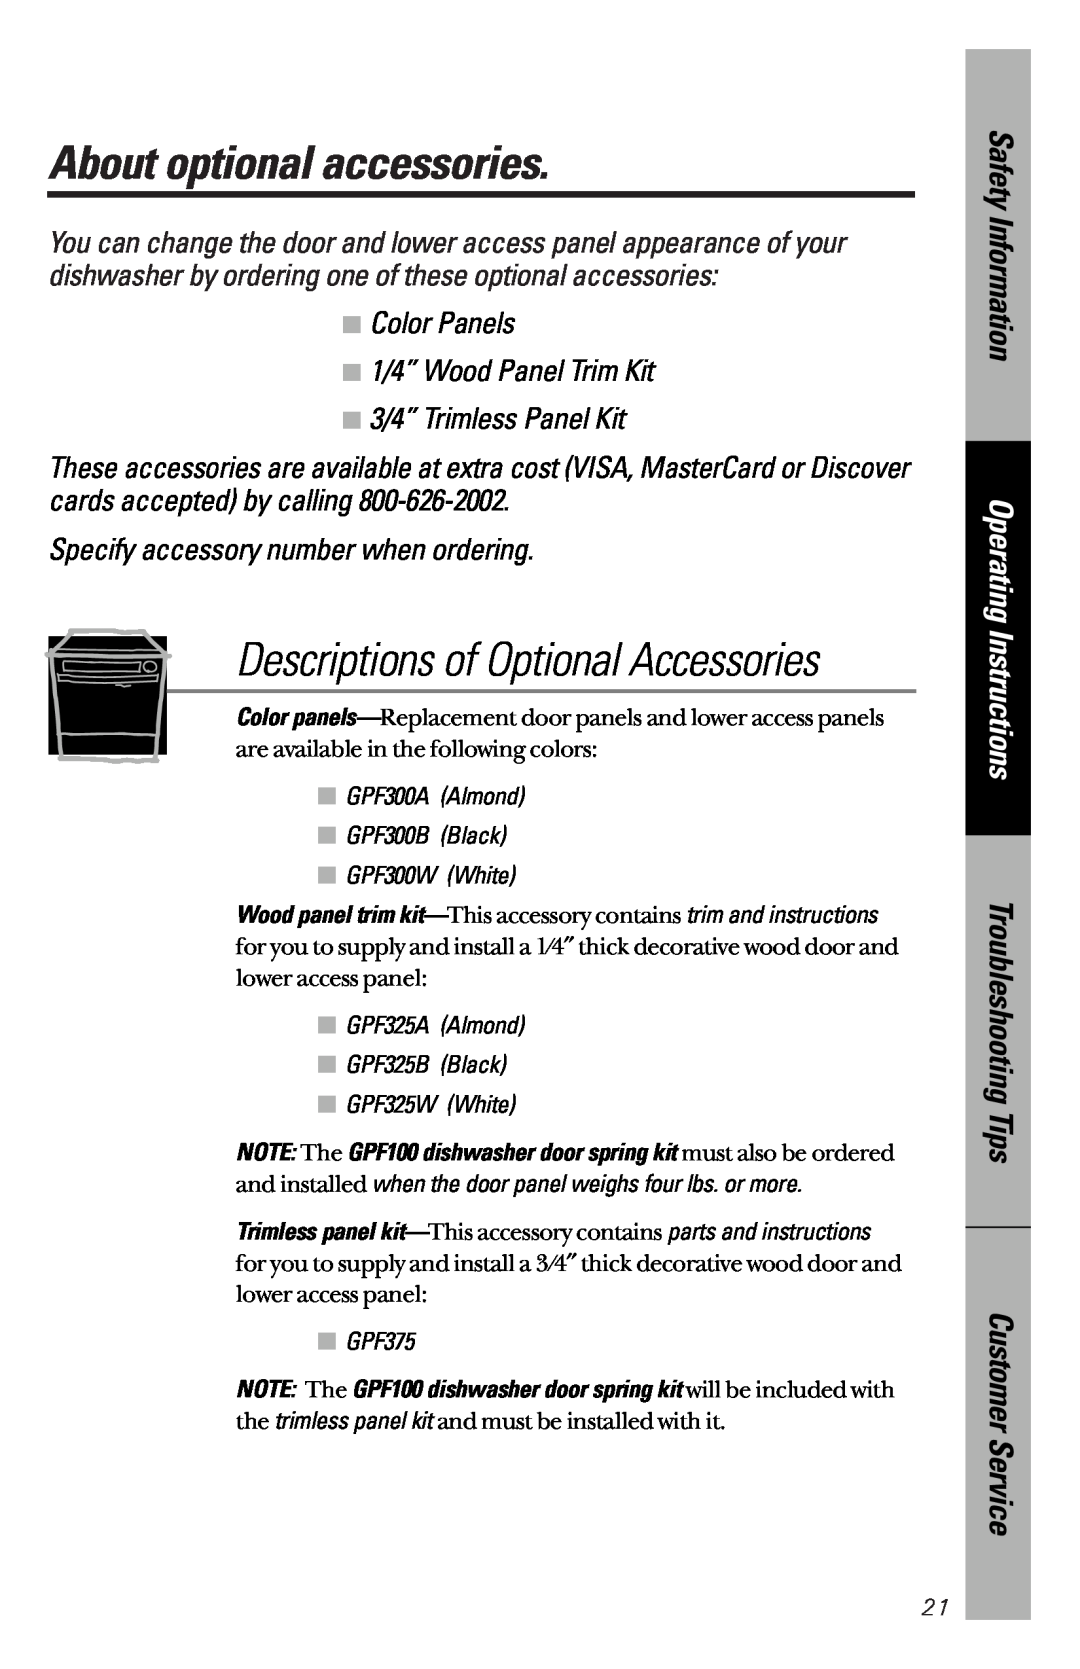 GE GSC3200 About optional accessories, Descriptions of Optional Accessories, Specify accessory number when ordering 